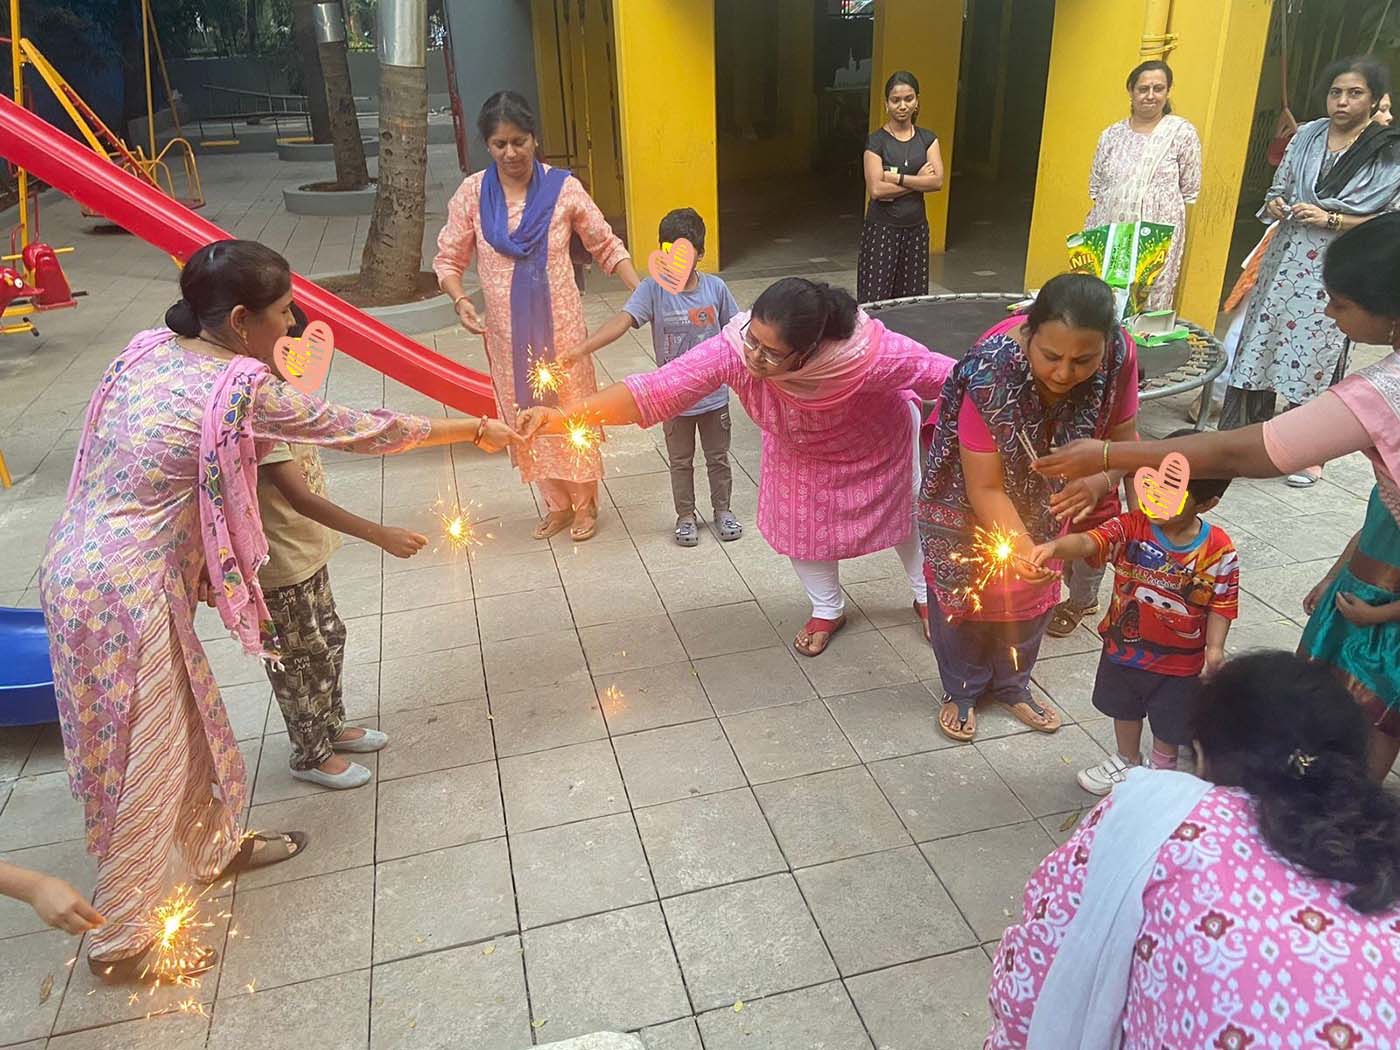 A group of women and children in India play with sparklers for Diwali